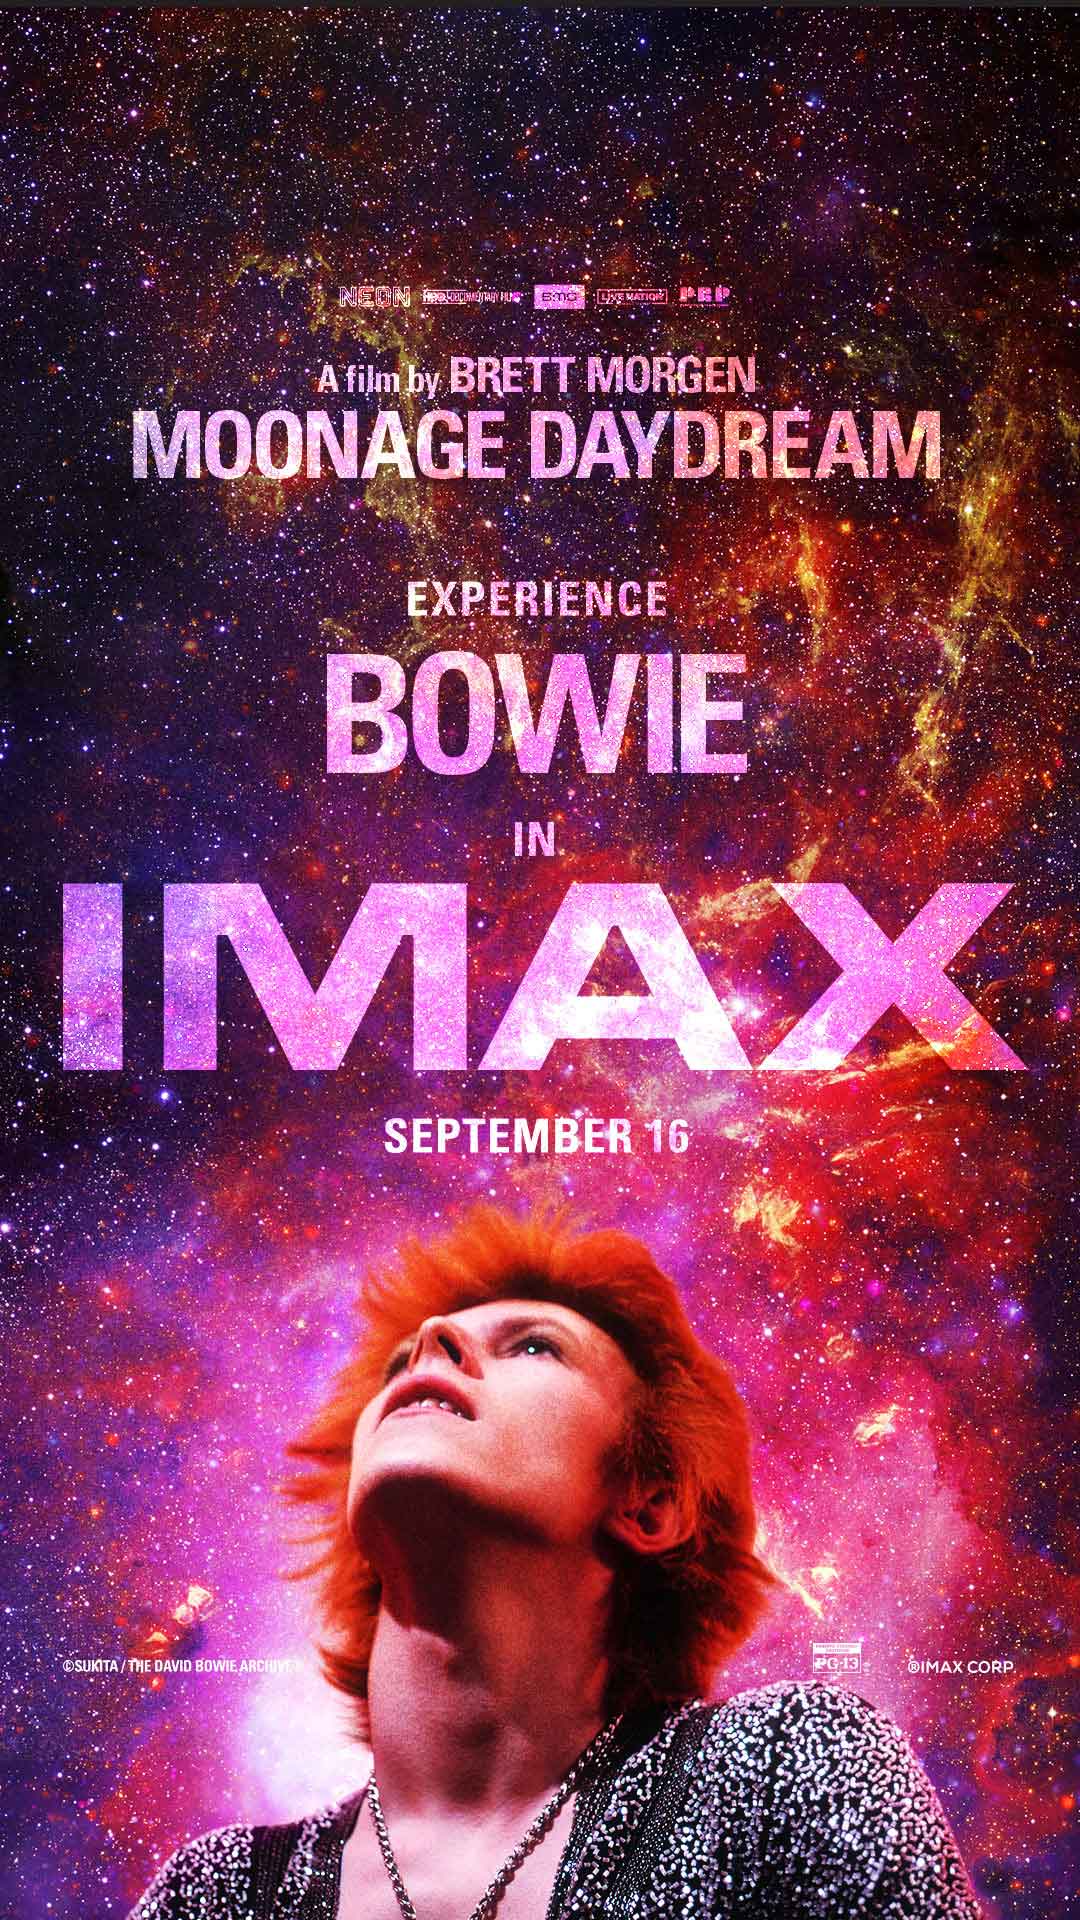 David Bowie on the cover of "Moonage Daydream"